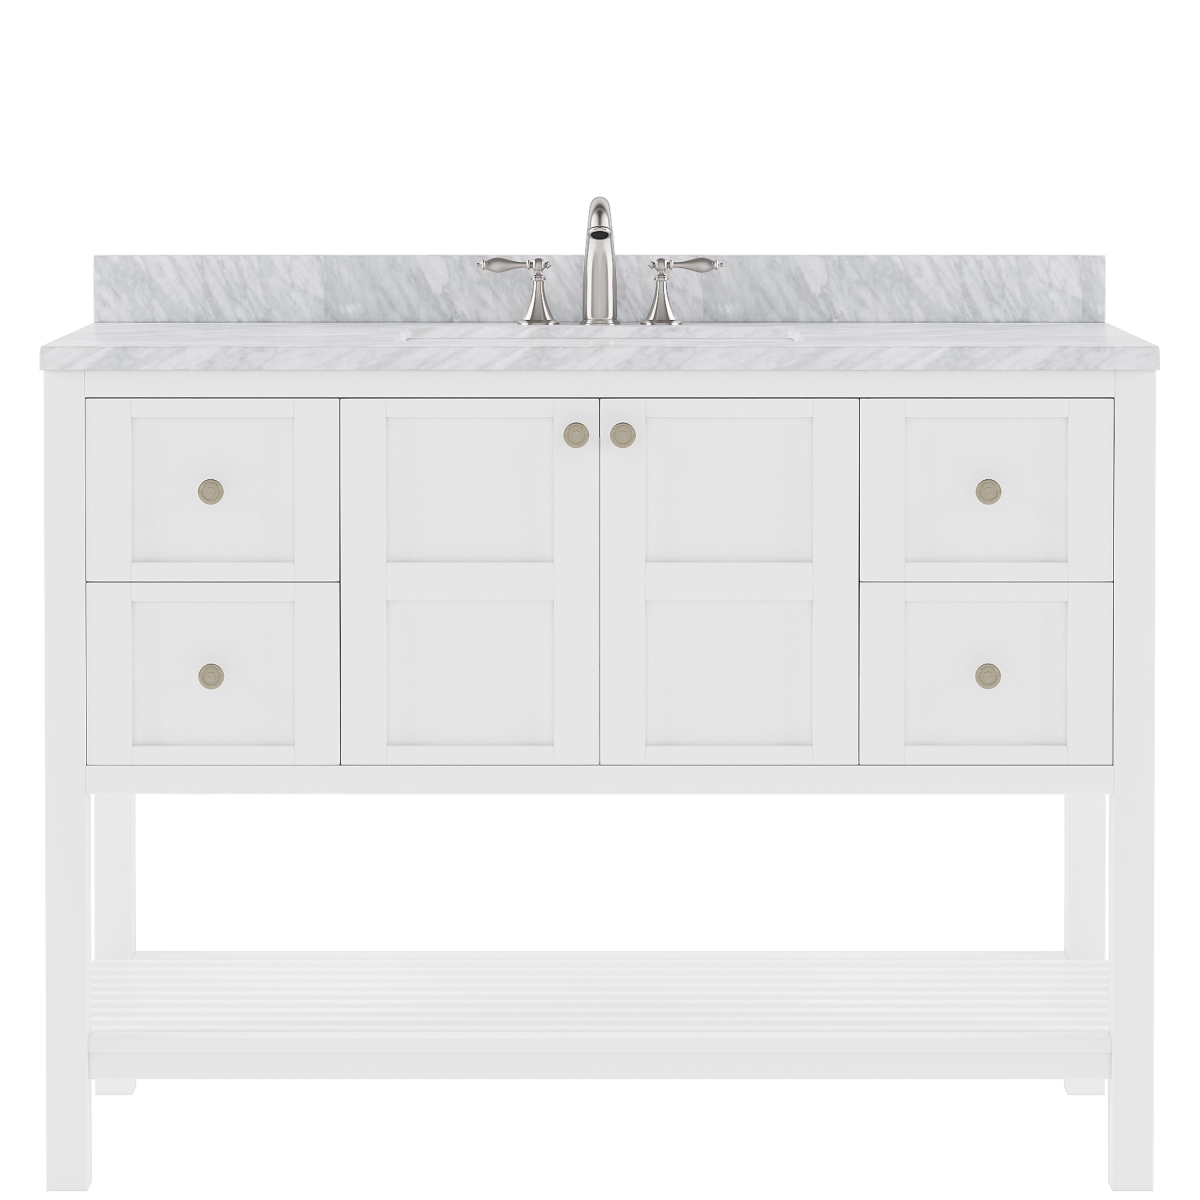 USA ES-30048-WMRO-WH-001-NM 48 in. Winterfell Single Bath Vanity with White Marble Top & Round Sink for Brushed Nickel Faucet, White -  VIRTU